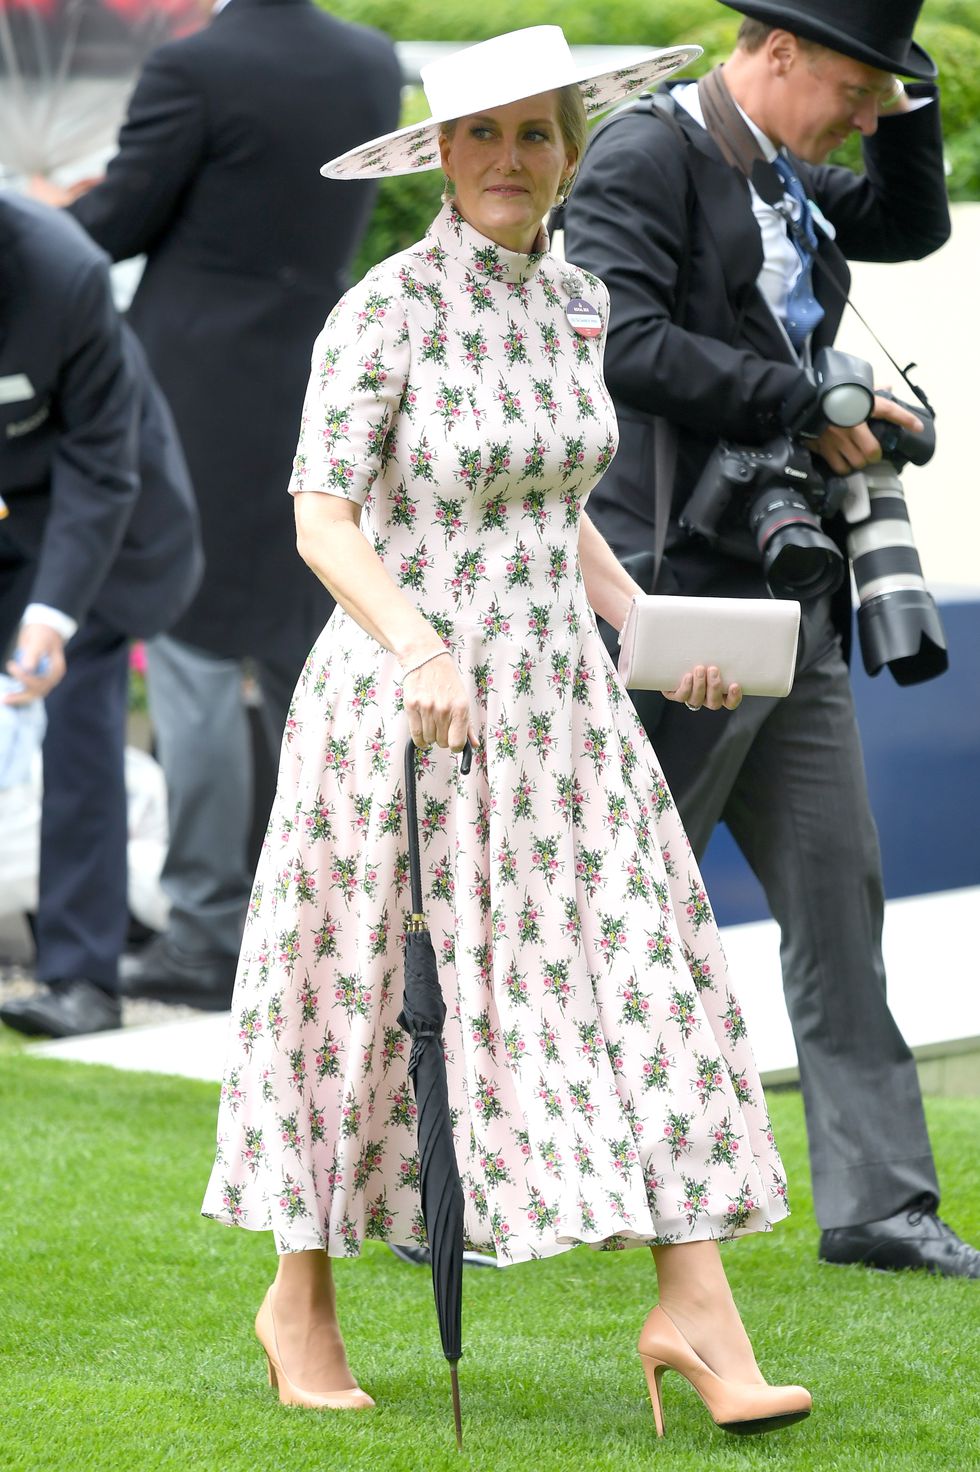 sophie-countess-of-wessex-attends-day-one-of-royal-ascot-at-news-photo-1156722521-1560932850.jpg